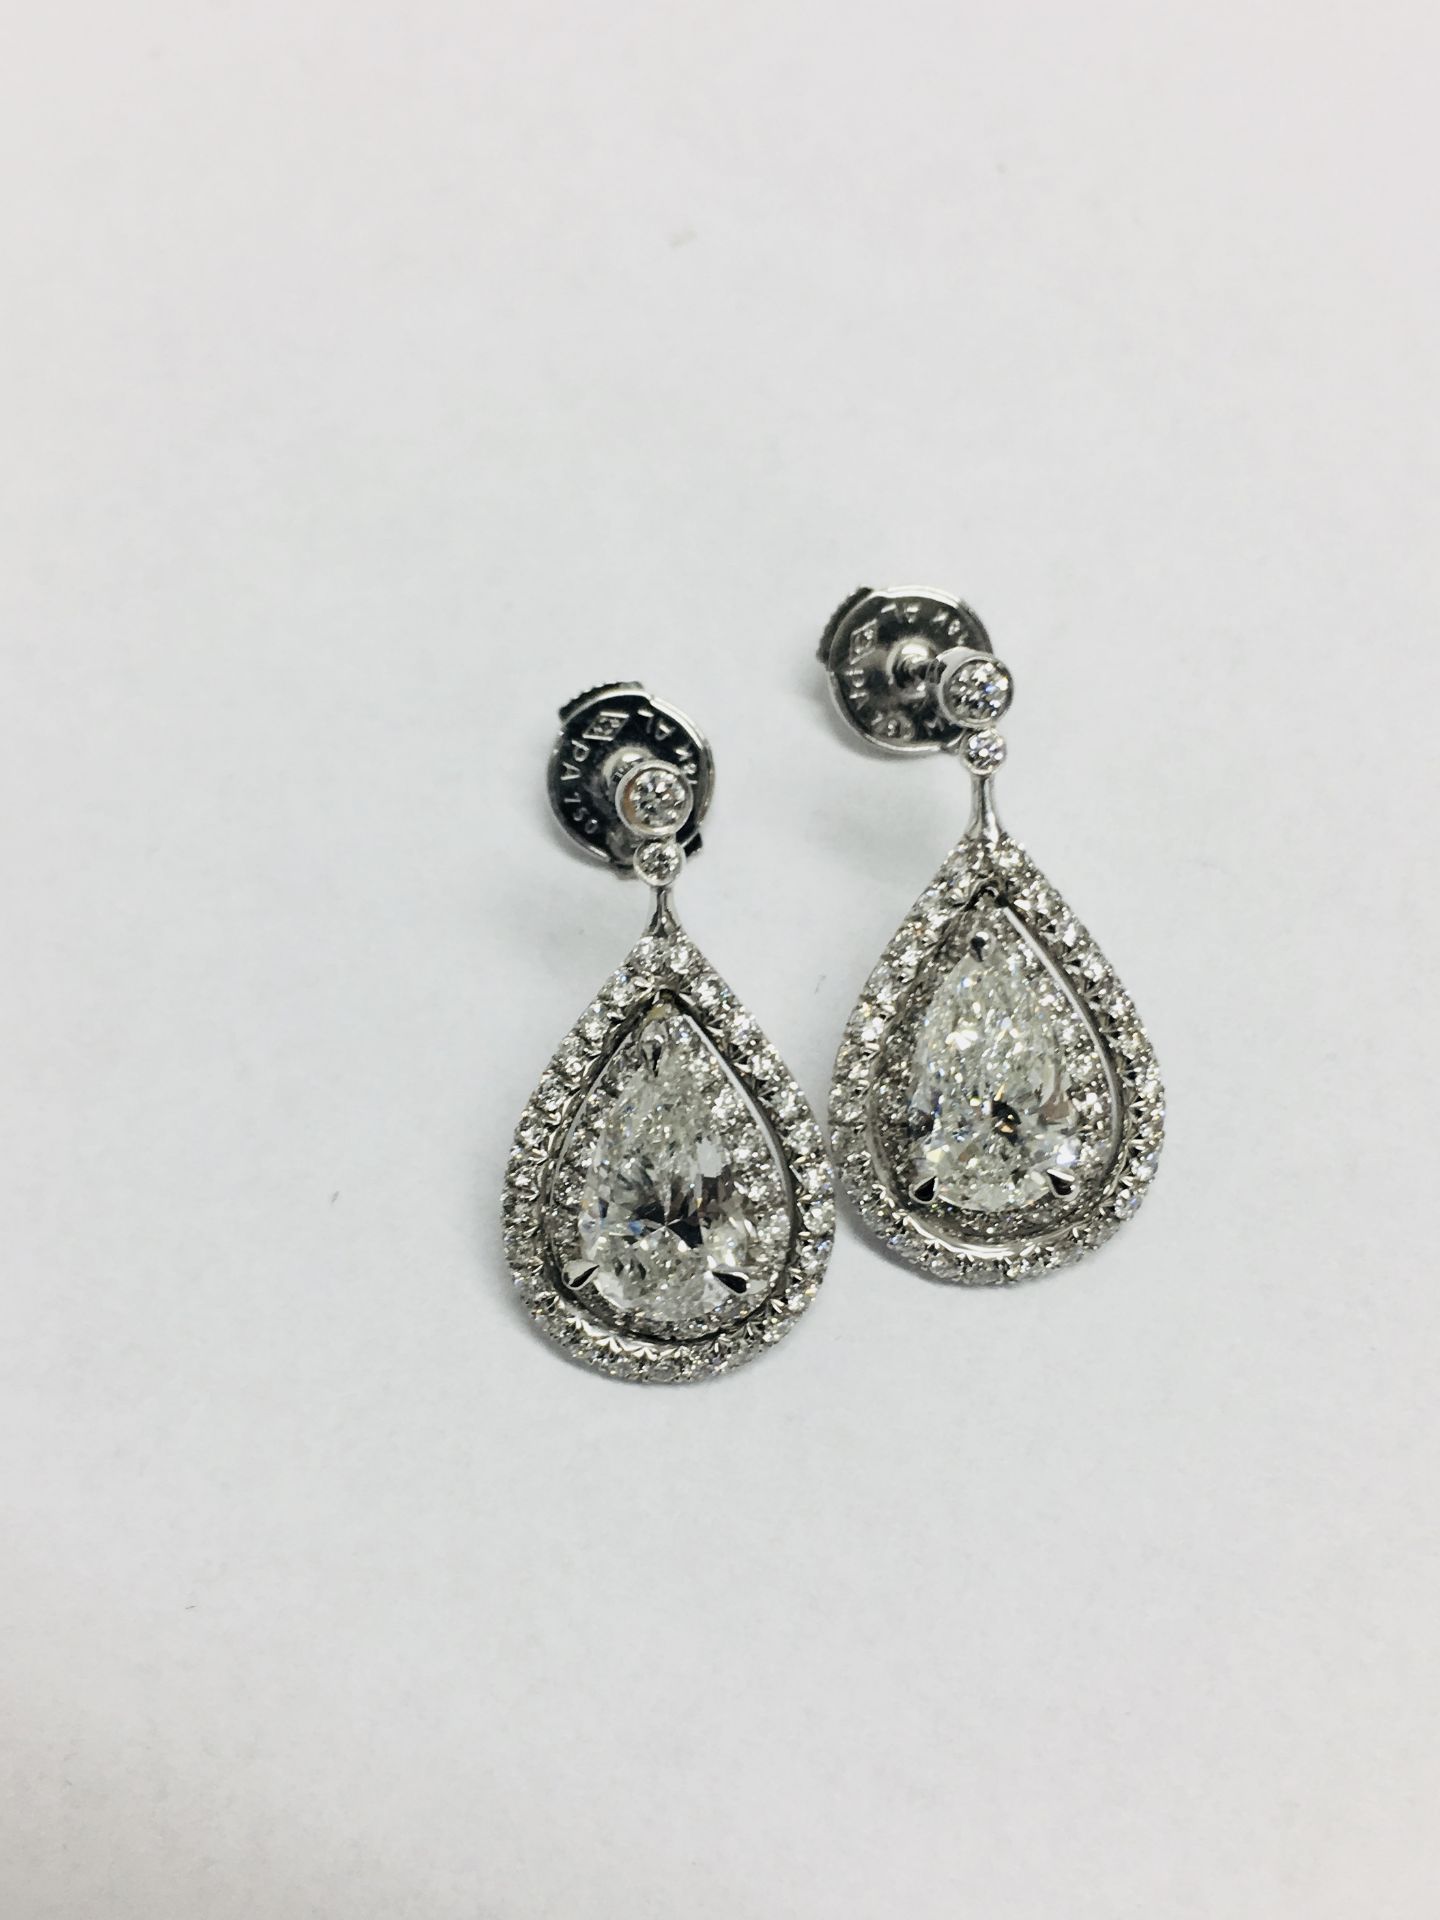 2.04ct diamond drop earrings. Each set with a certificated pear shaped diamond with a halo - Image 4 of 6